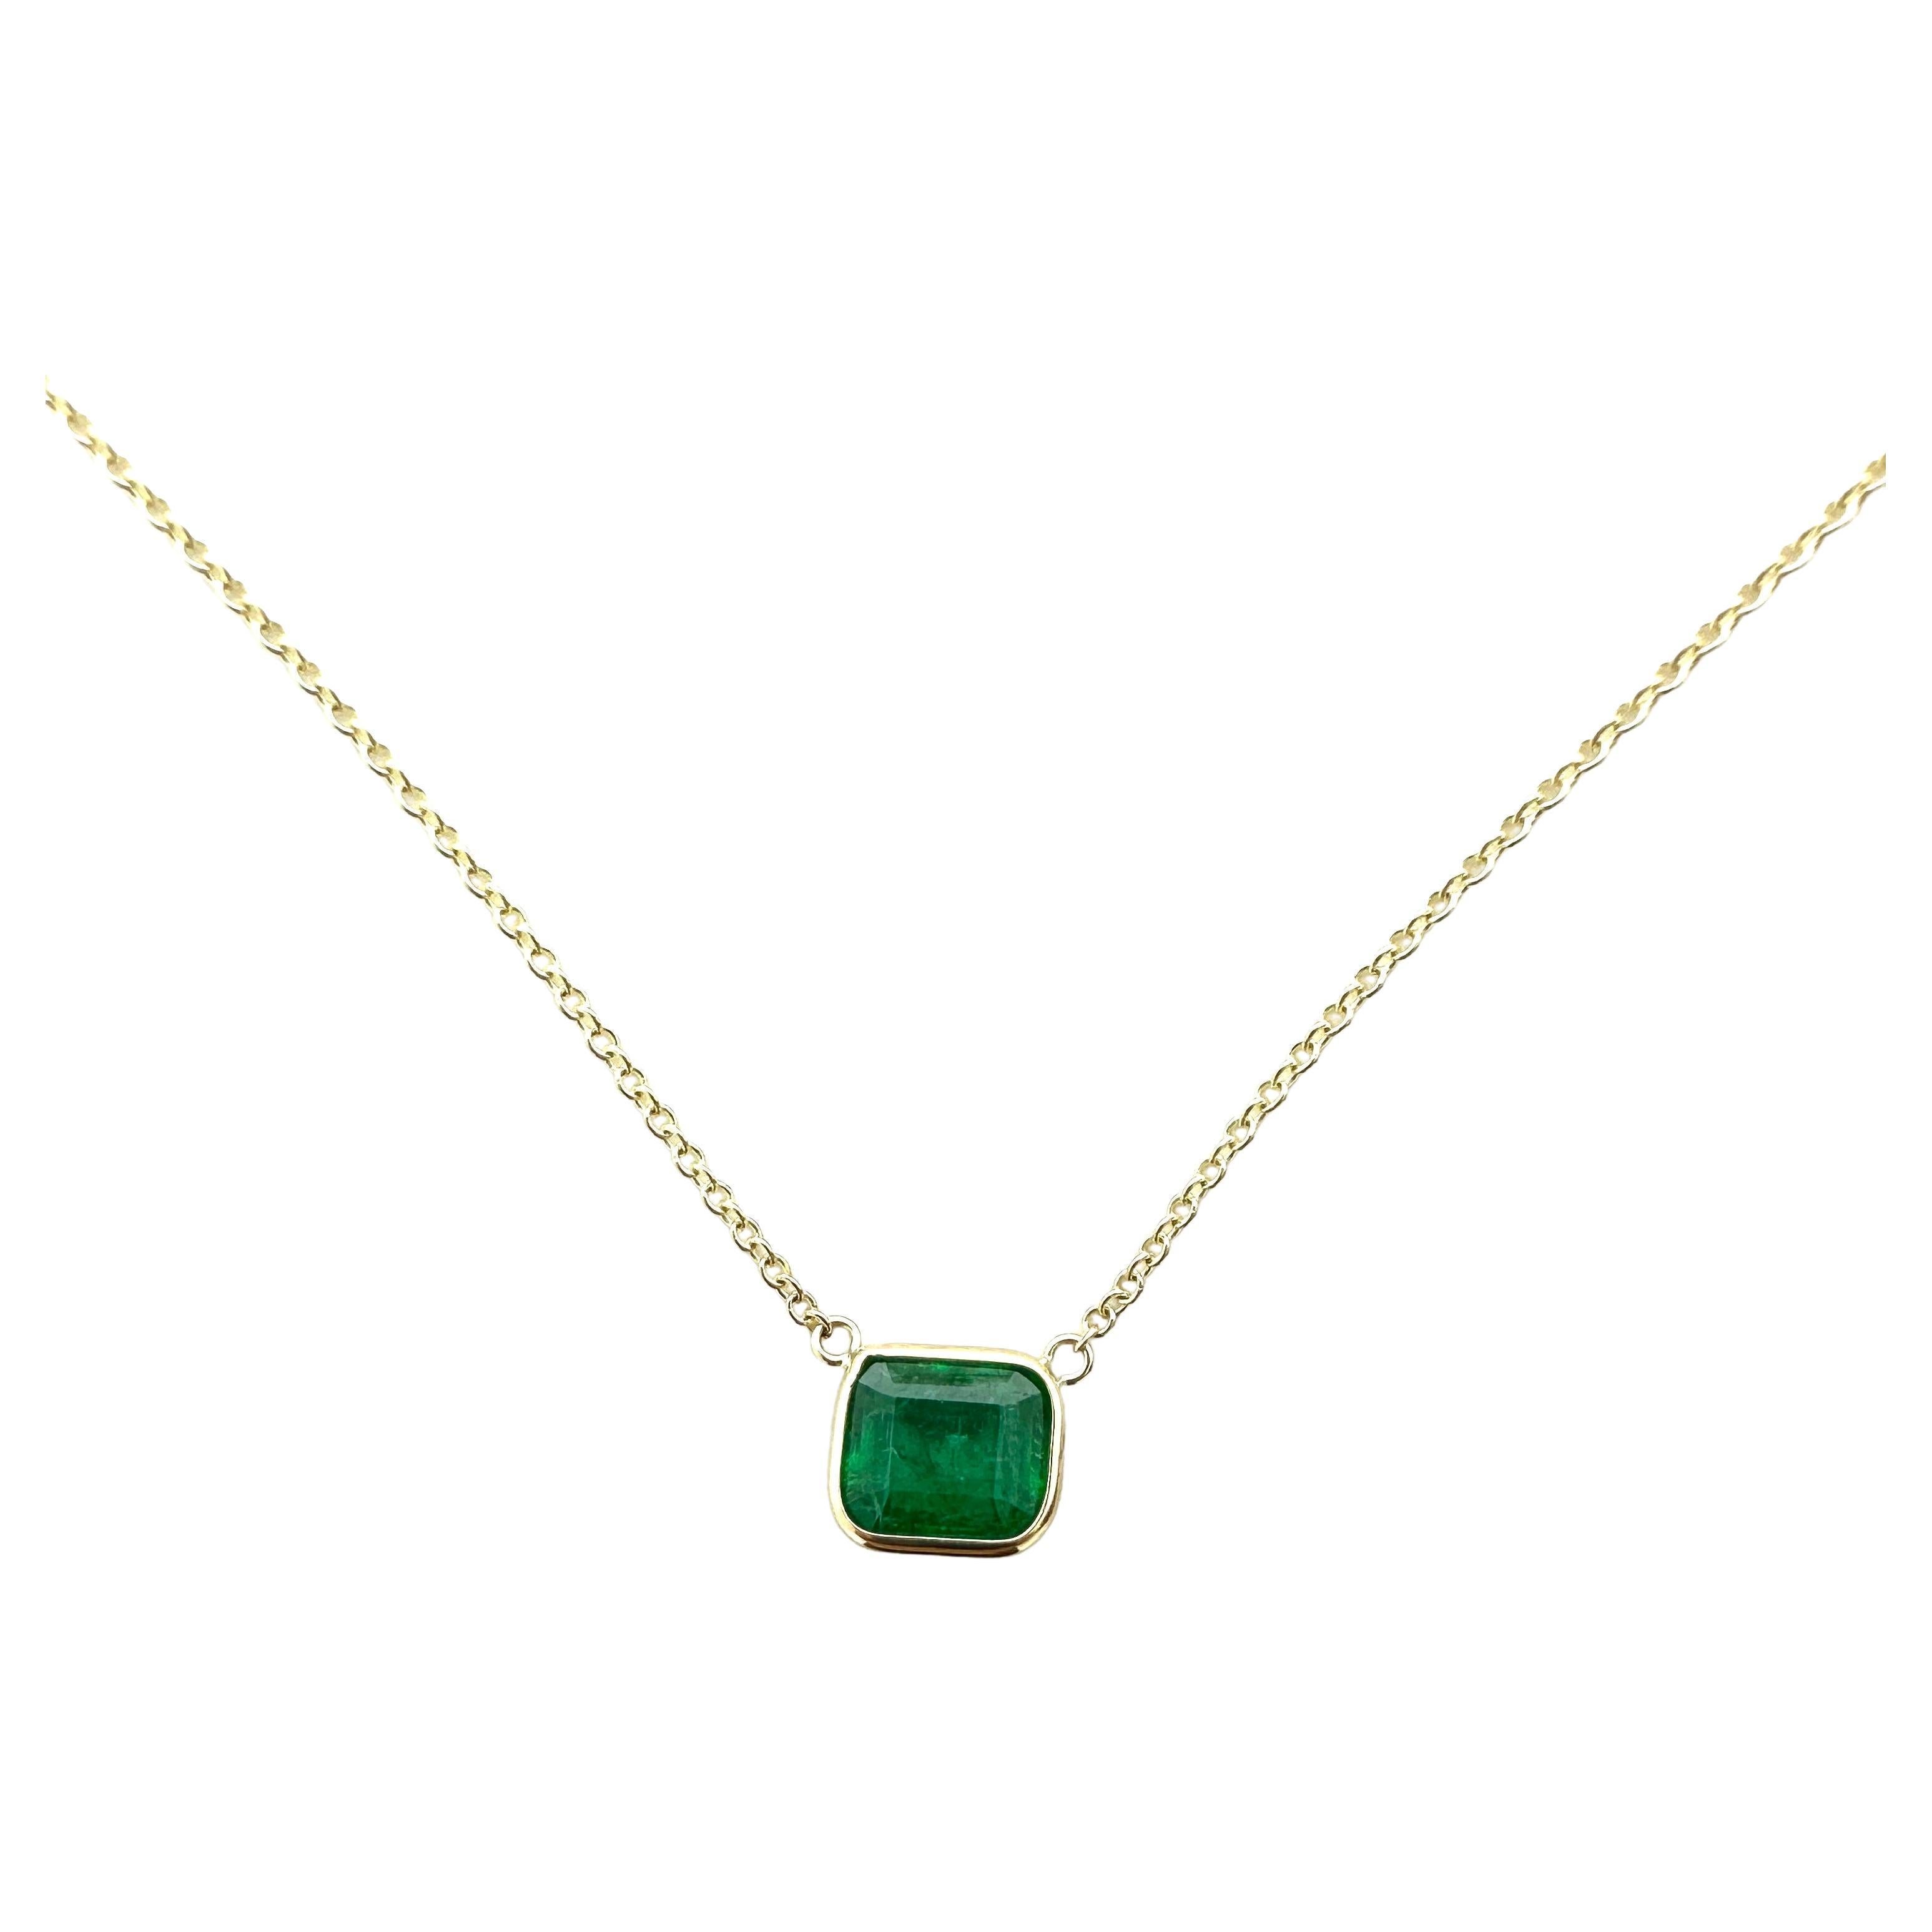 1.88 Carat Weight Green Emerald Emerald Cut Solitaire Necklace in 14k YG For Sale